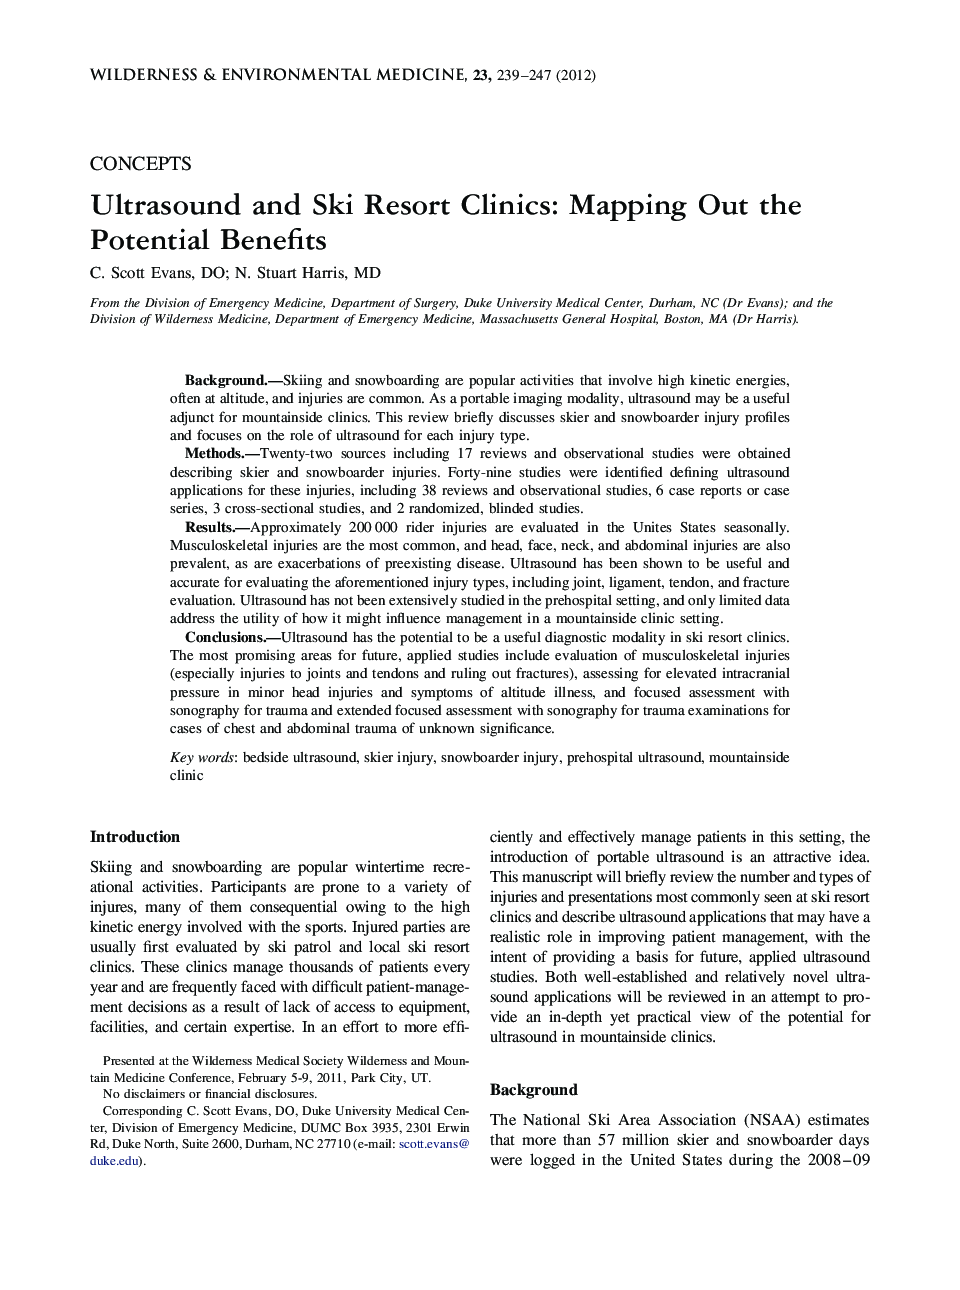 Ultrasound and Ski Resort Clinics: Mapping Out the Potential Benefits 